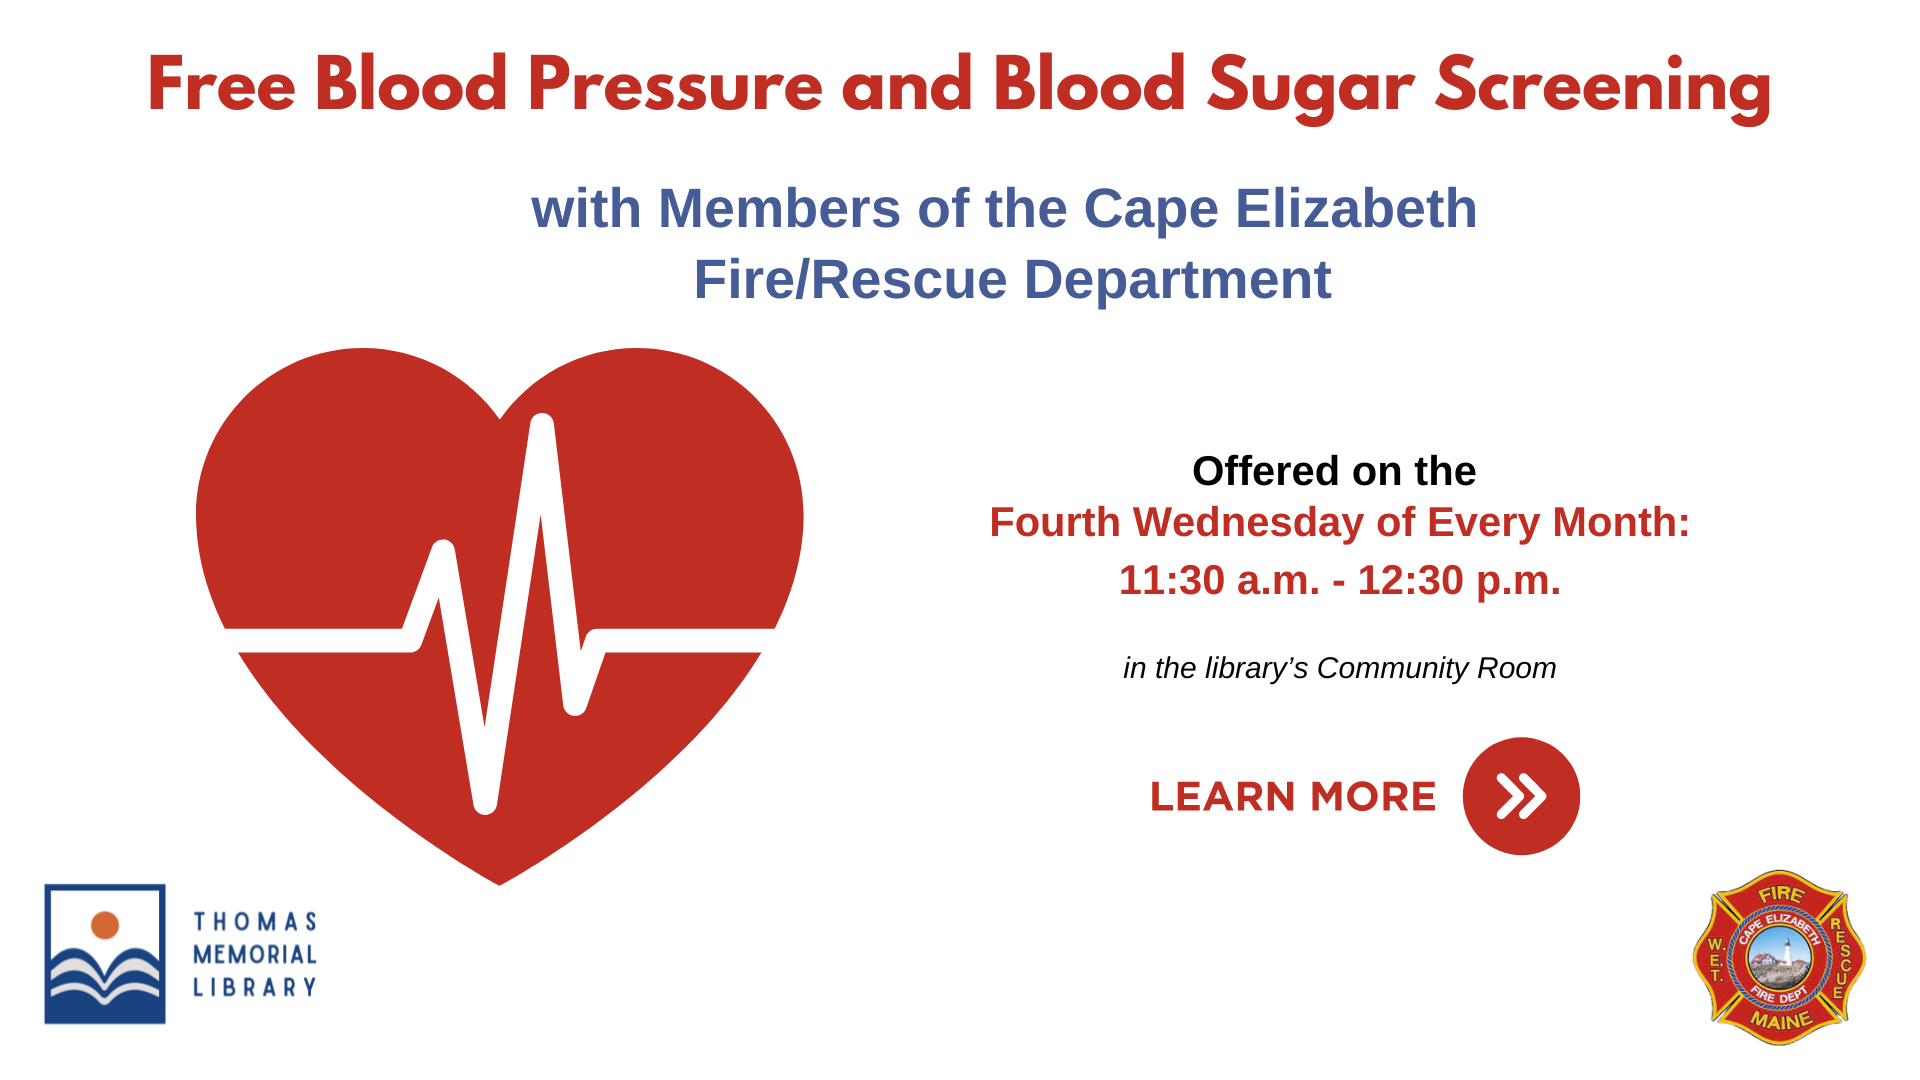 Free blood pressure and blood sugar screening is offered on the fourth Wednesday of every month from 11:30 a.m. - 12:30 p.m. A red heart shape with a blood pressure line through it appears with the library logo and the Cape Elizabeth Fire/Rescue Department logo